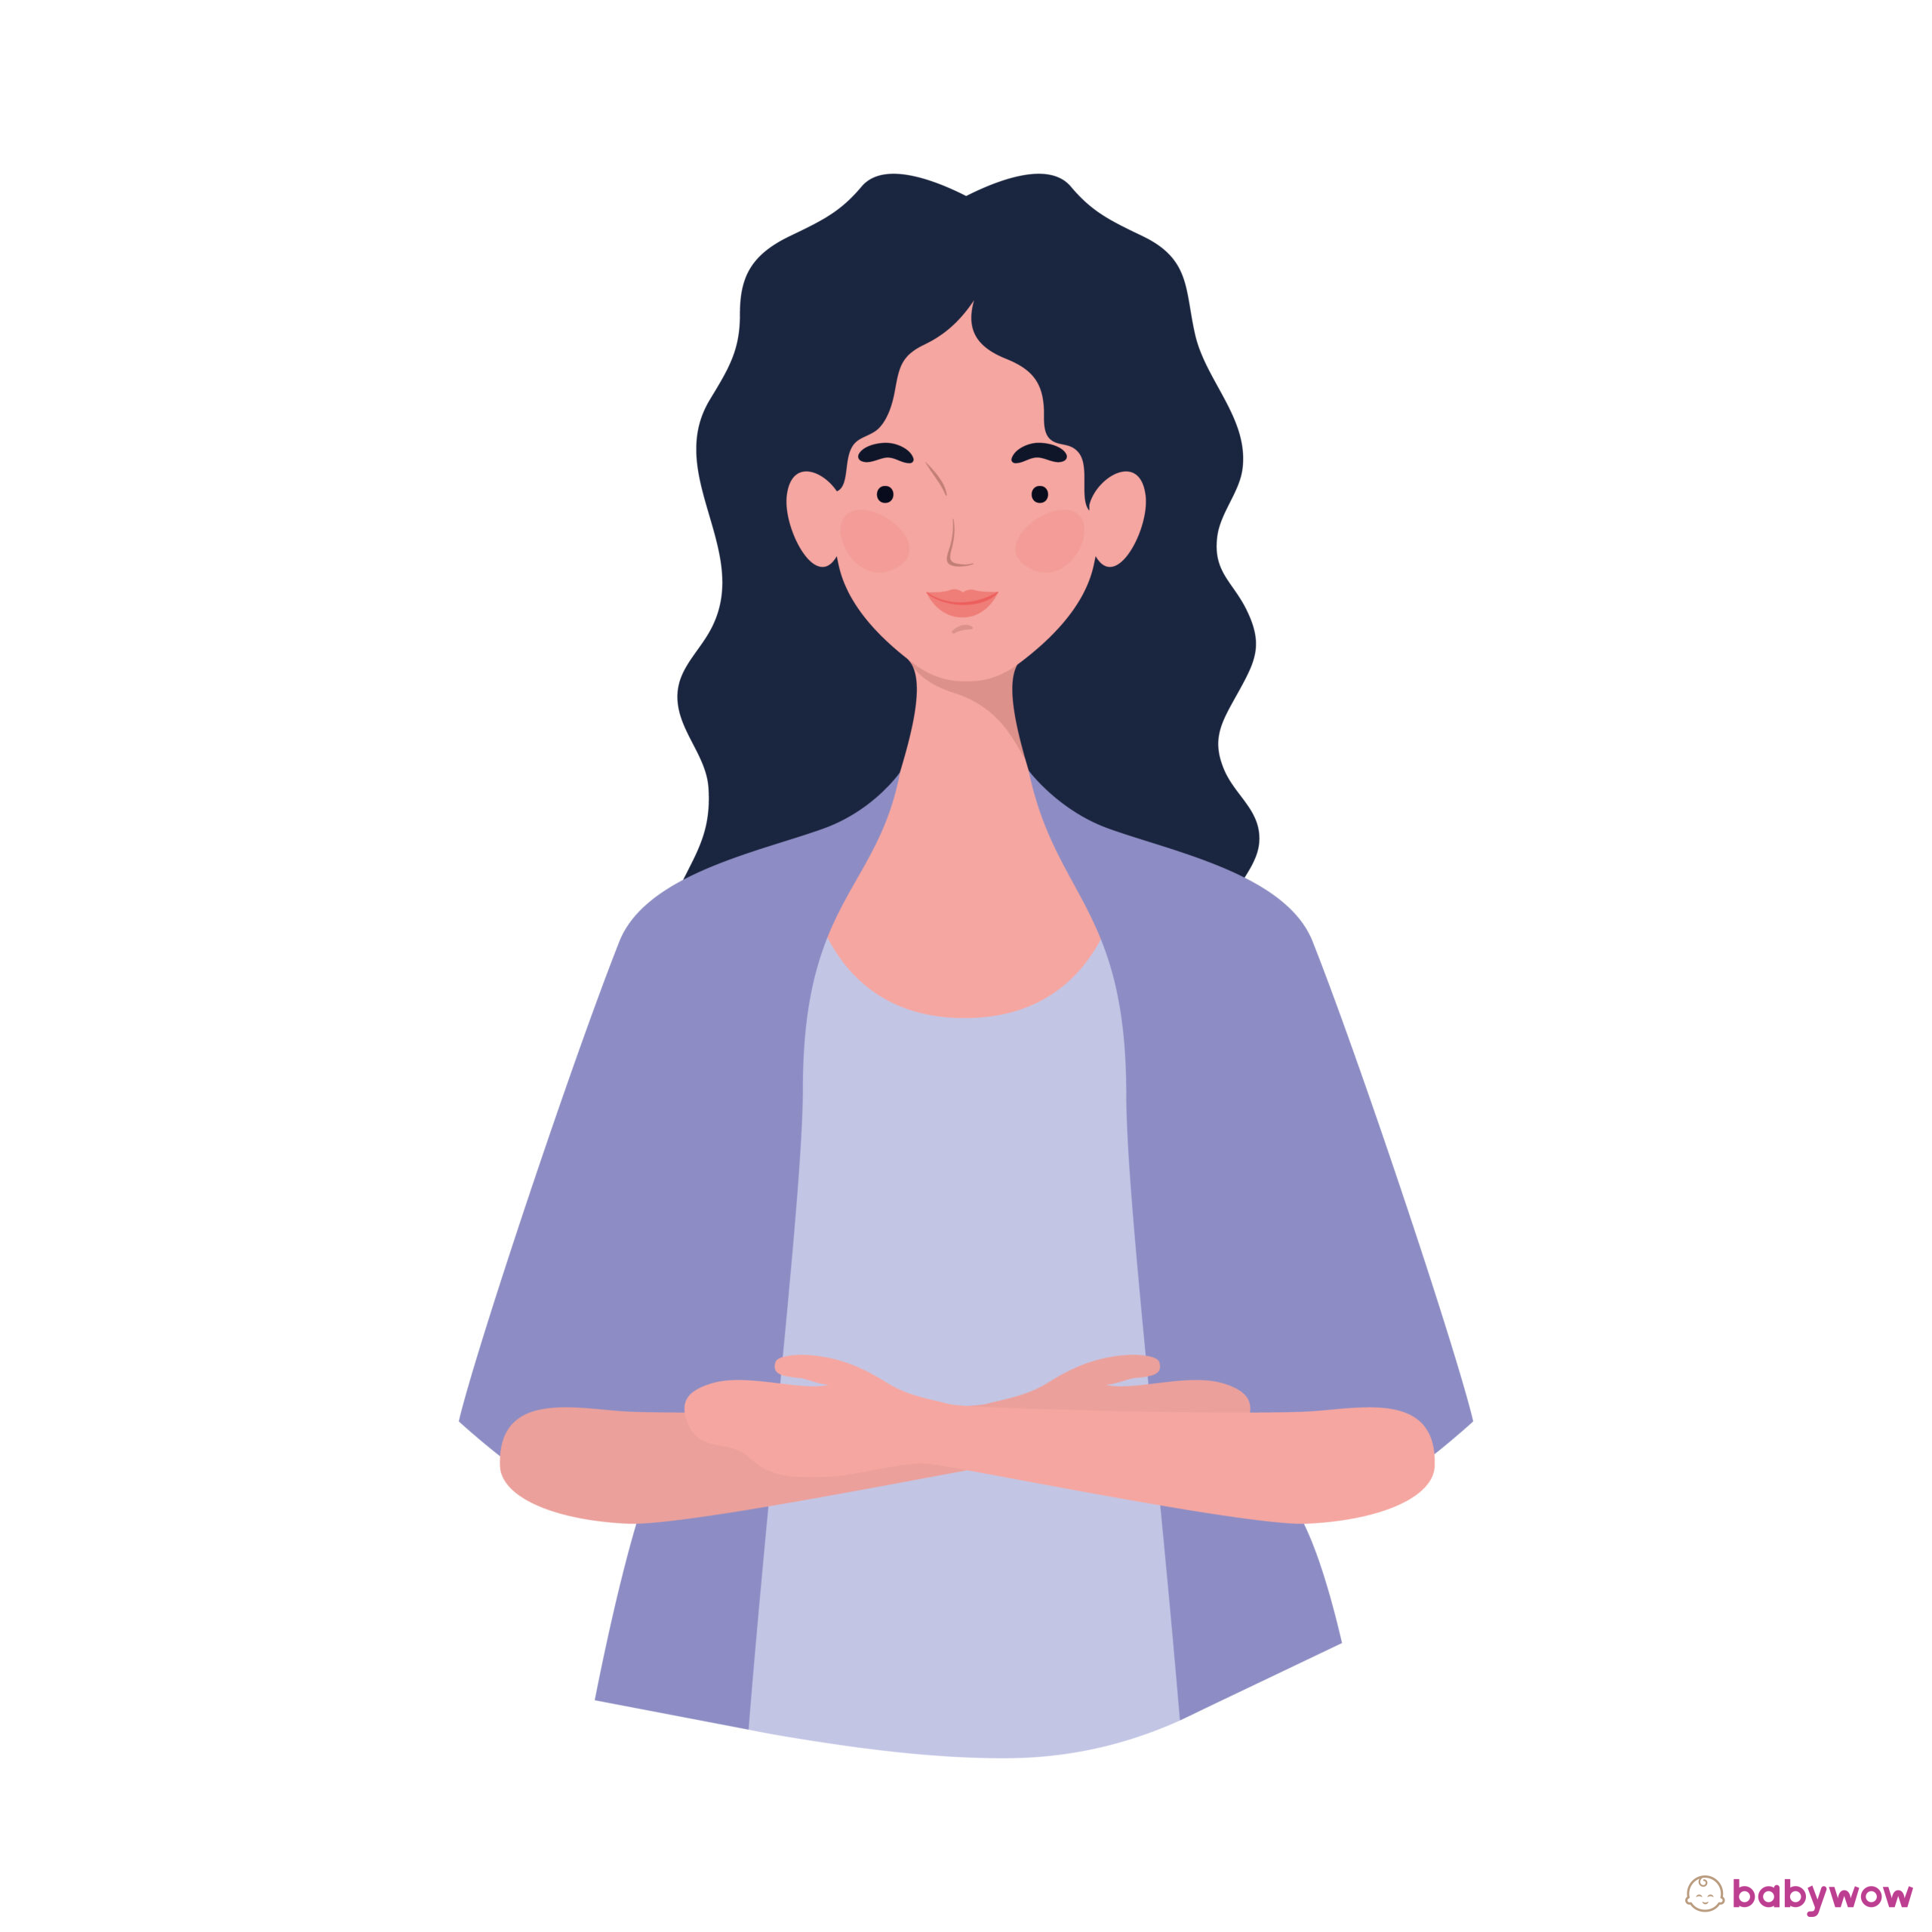 young woman on white background vector illustration design